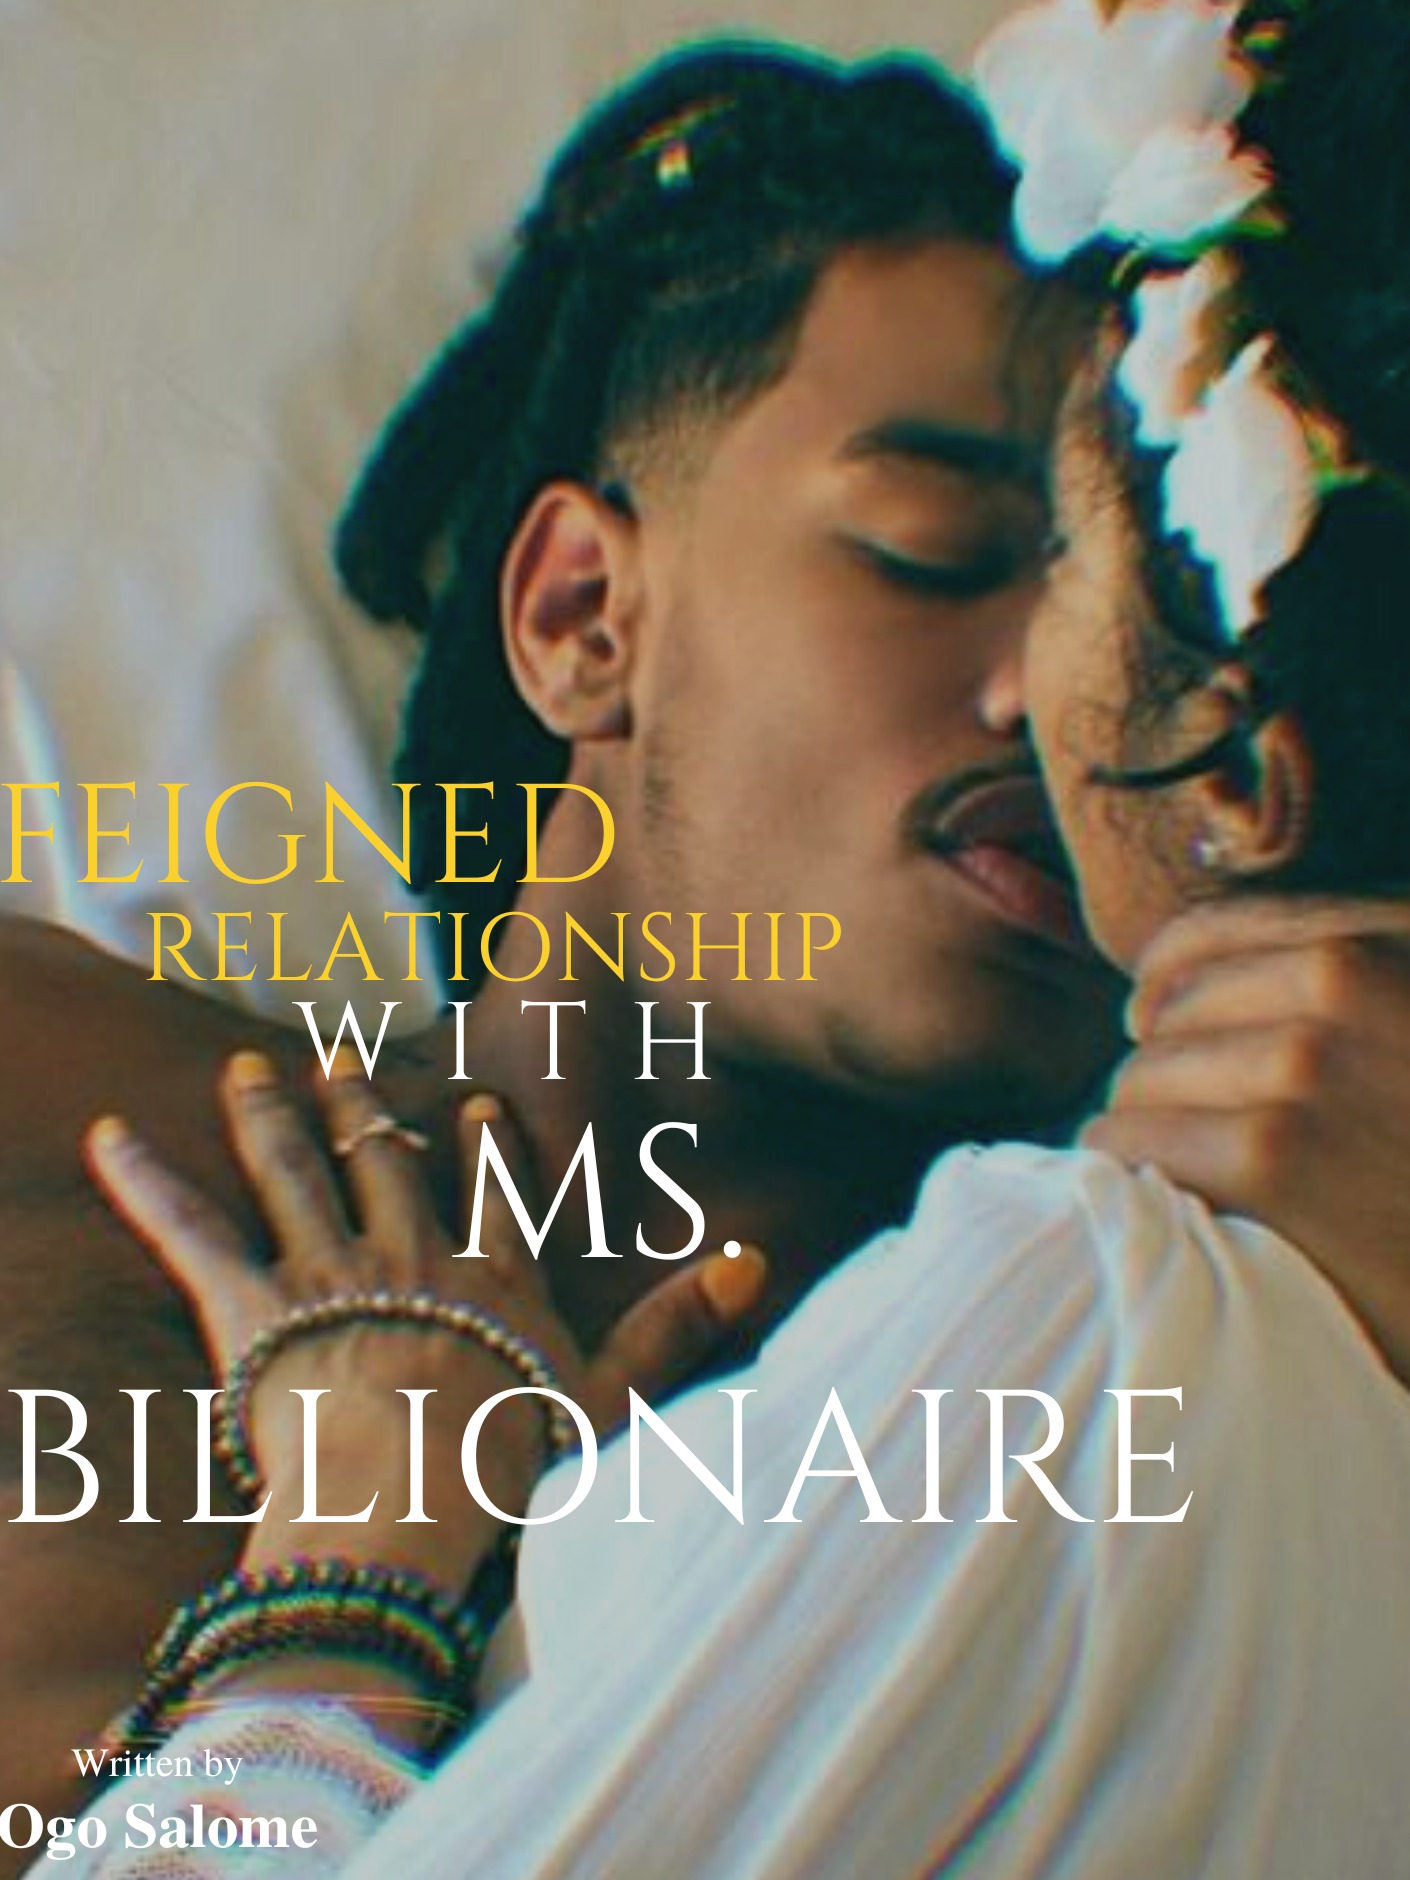 Feigned Relationship with Ms. Billionaire